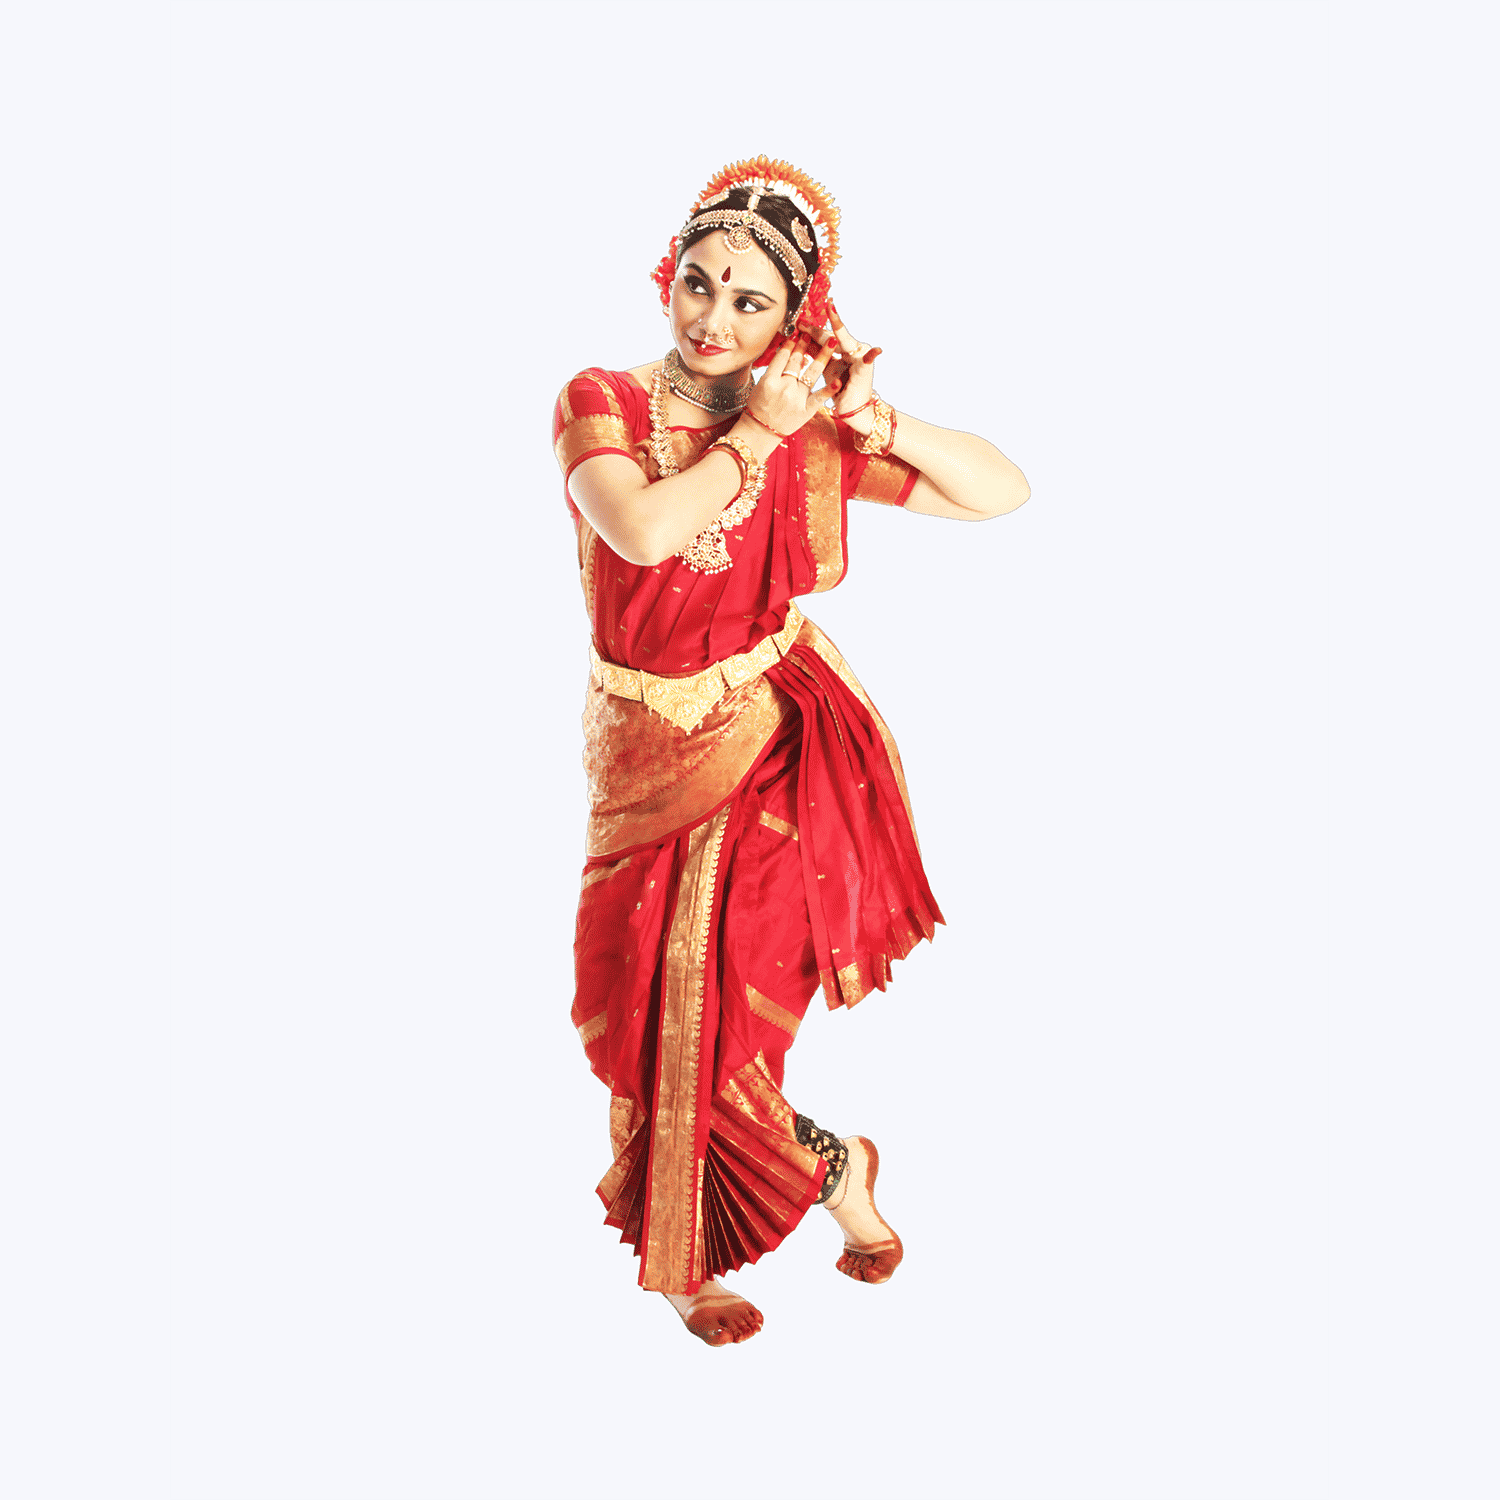 Dancer in red and gold traditional Indian dance outfit